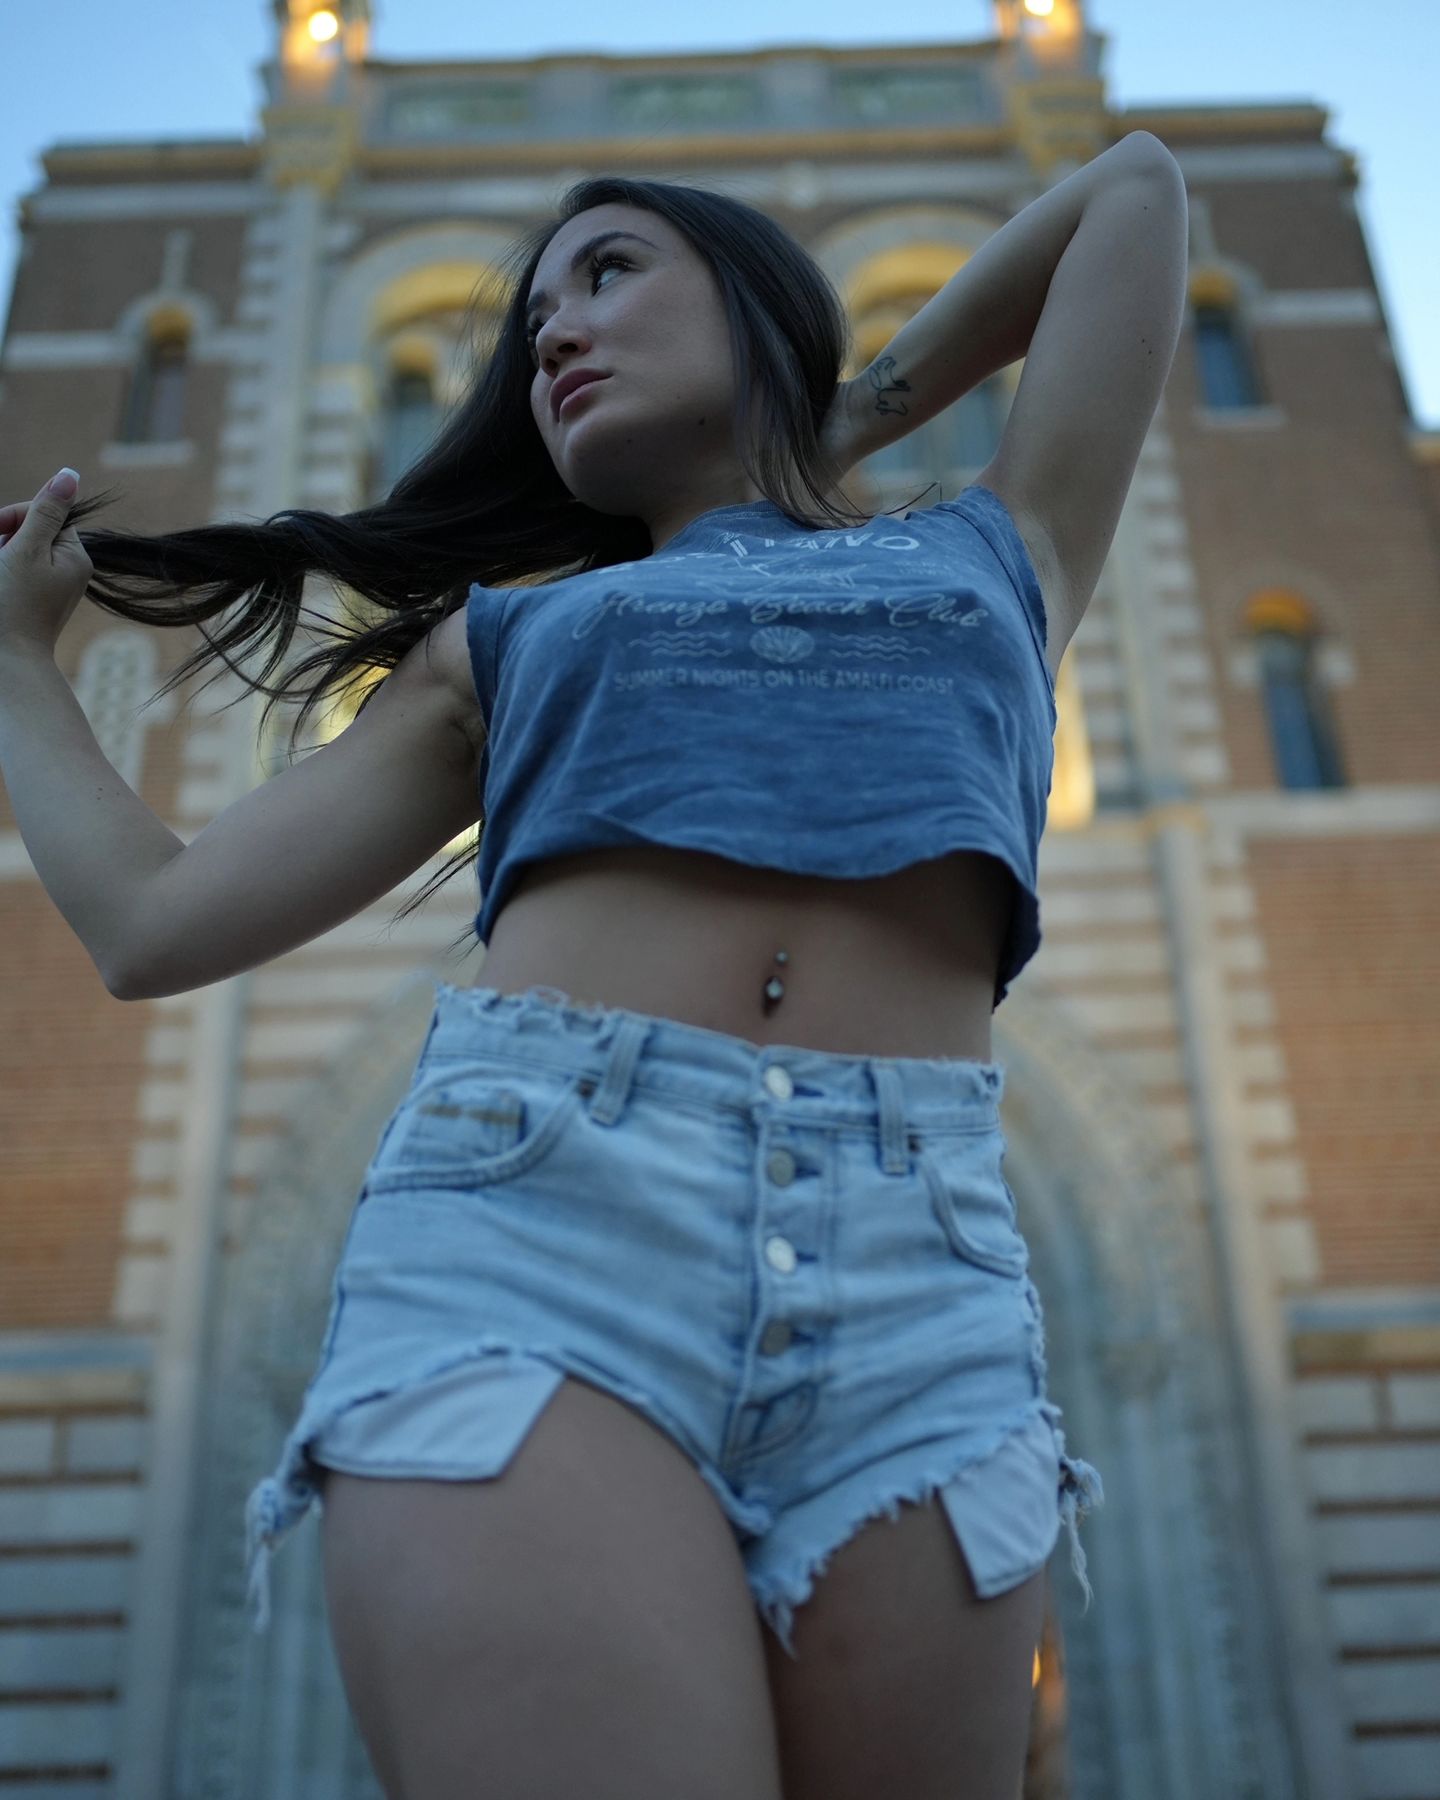 What do you think I'm looking at? 

#croptops #brunette #jeanshorts